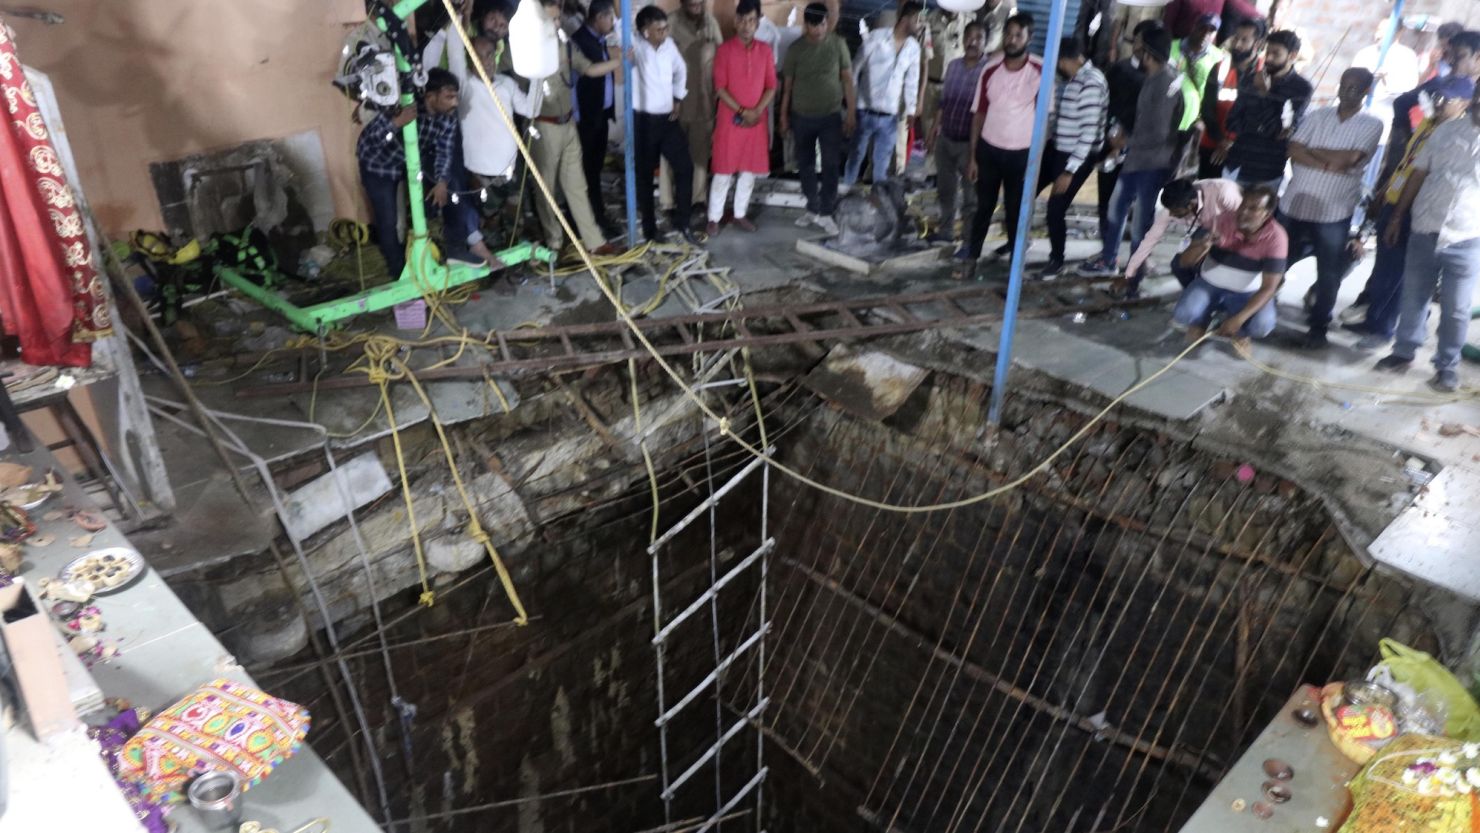 People stand around the collapsed flooring where people fell into a well at a temple in Indore, India, on March 30.